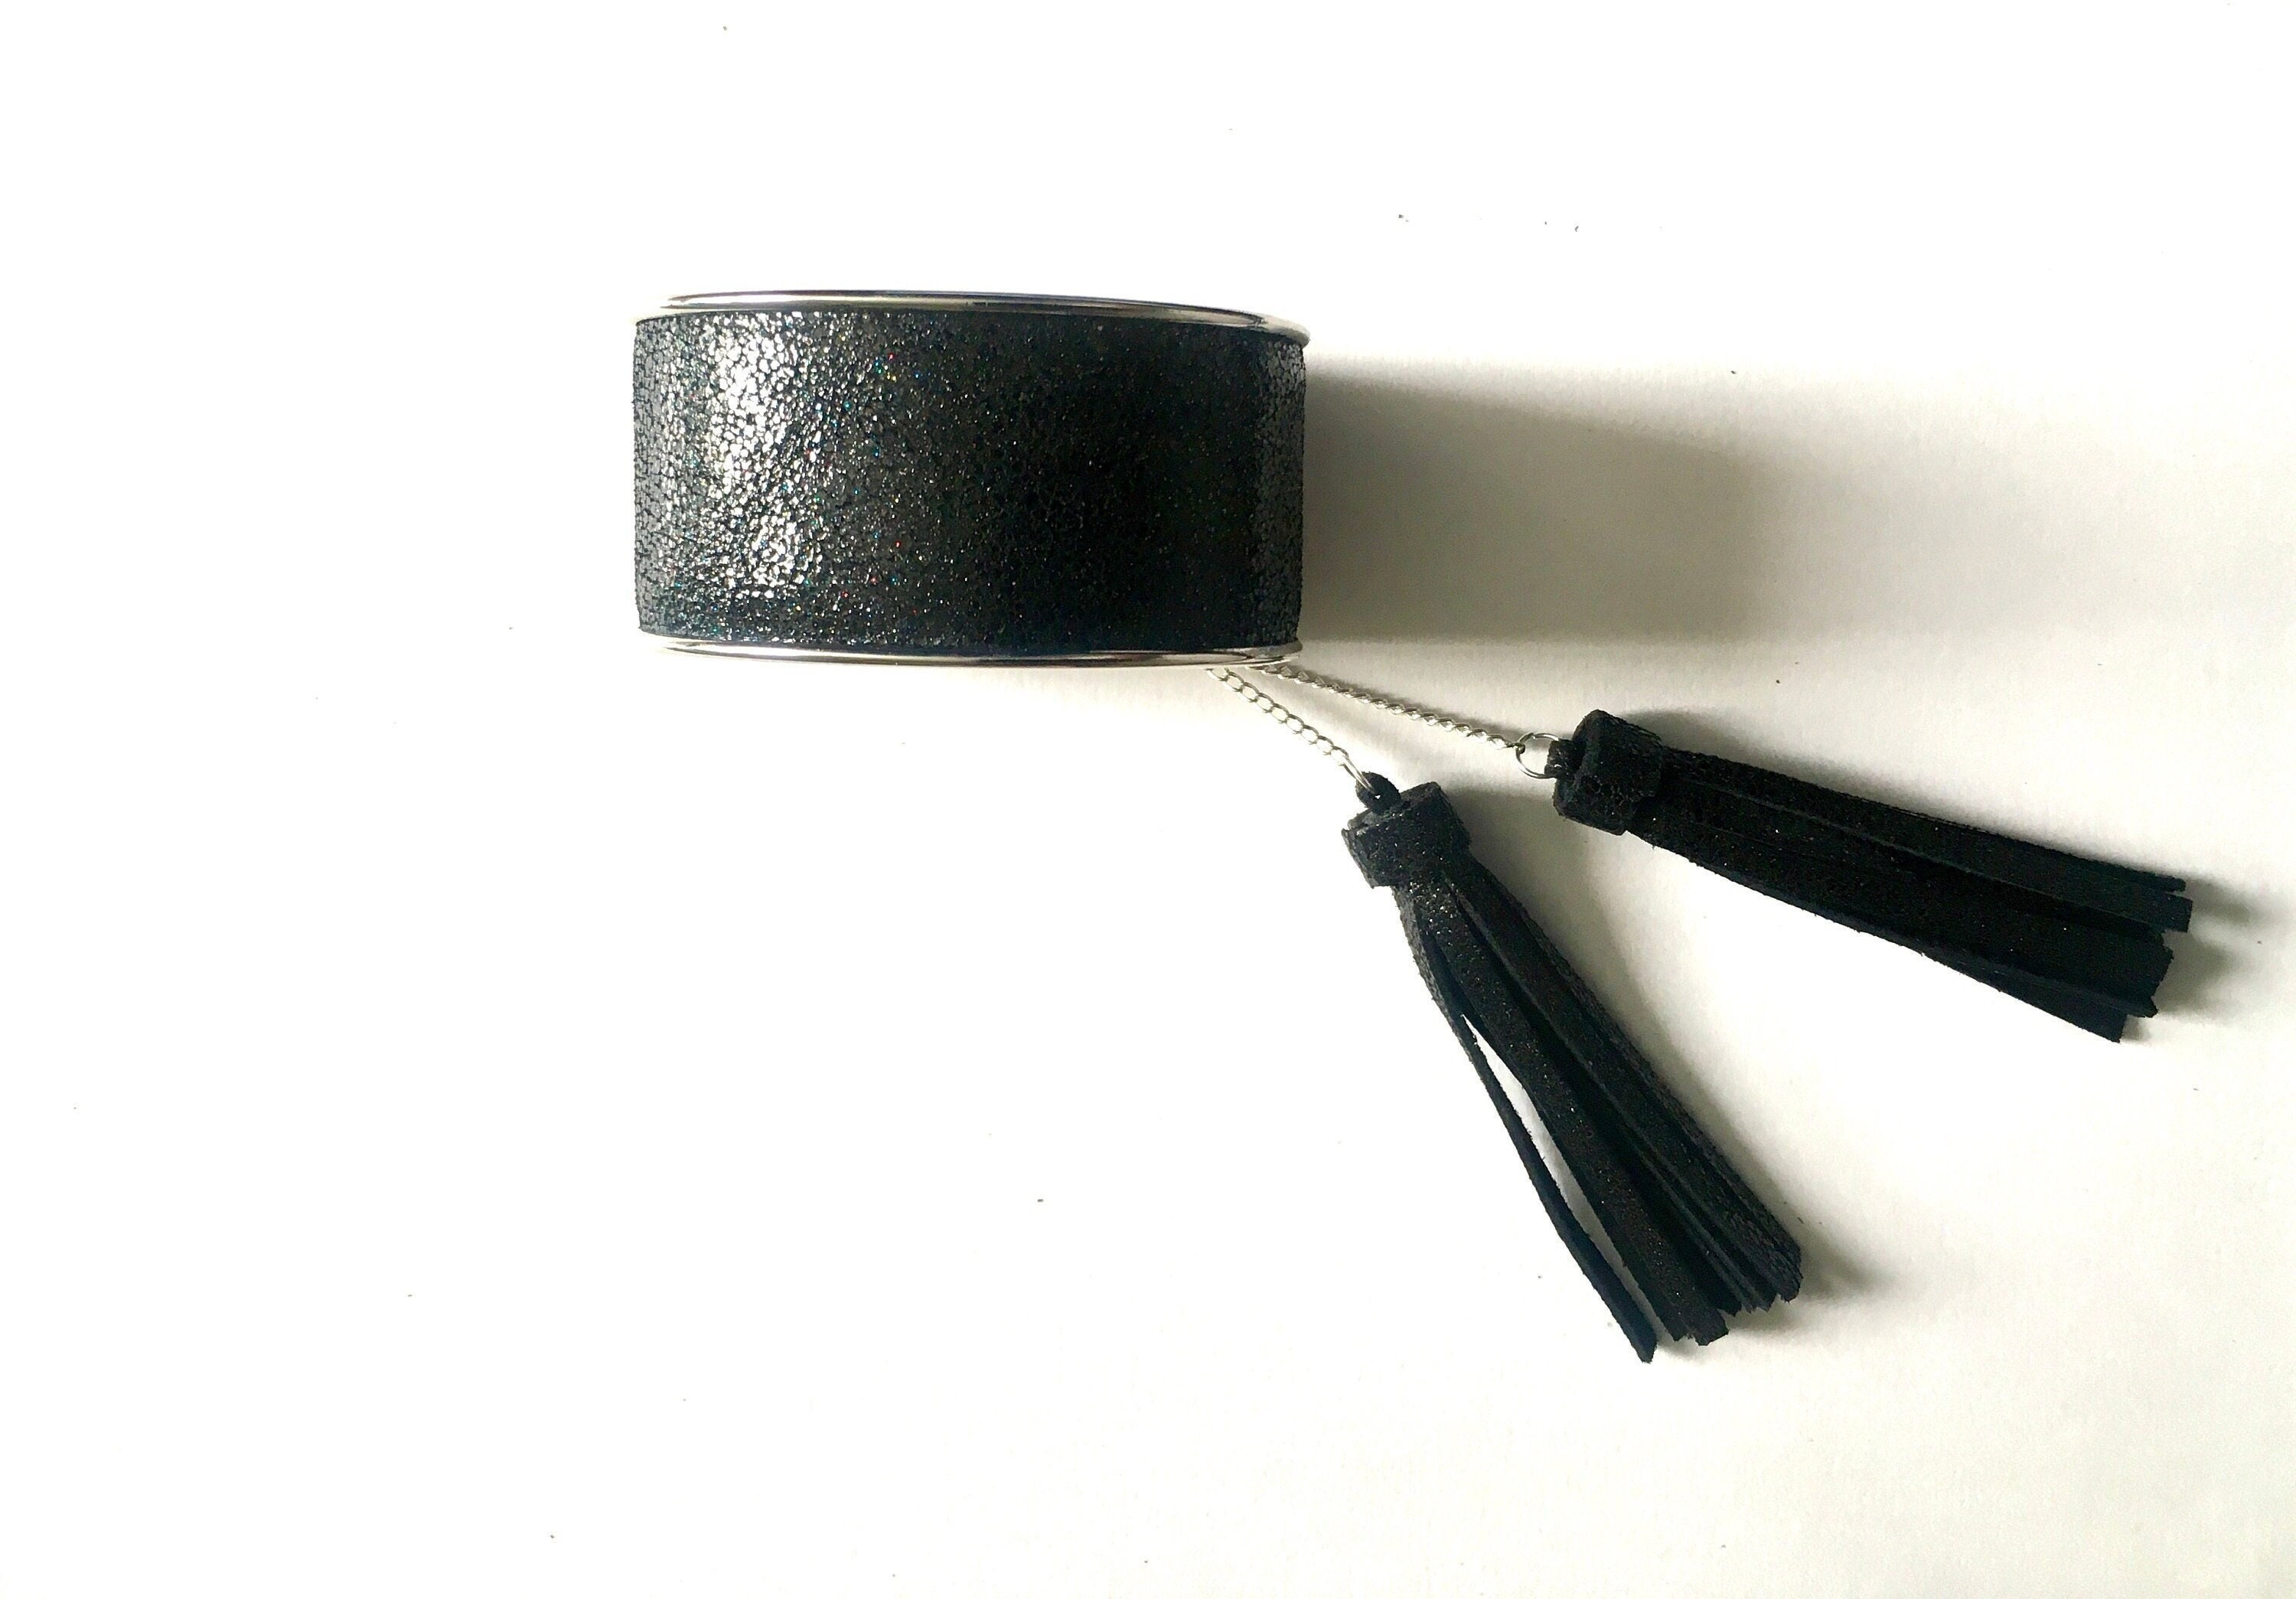 Black/gray Lucite Bangle. Wide Plastic Bracelet With Glitter Inclusion.  Medium Sized. Gift Boxed 